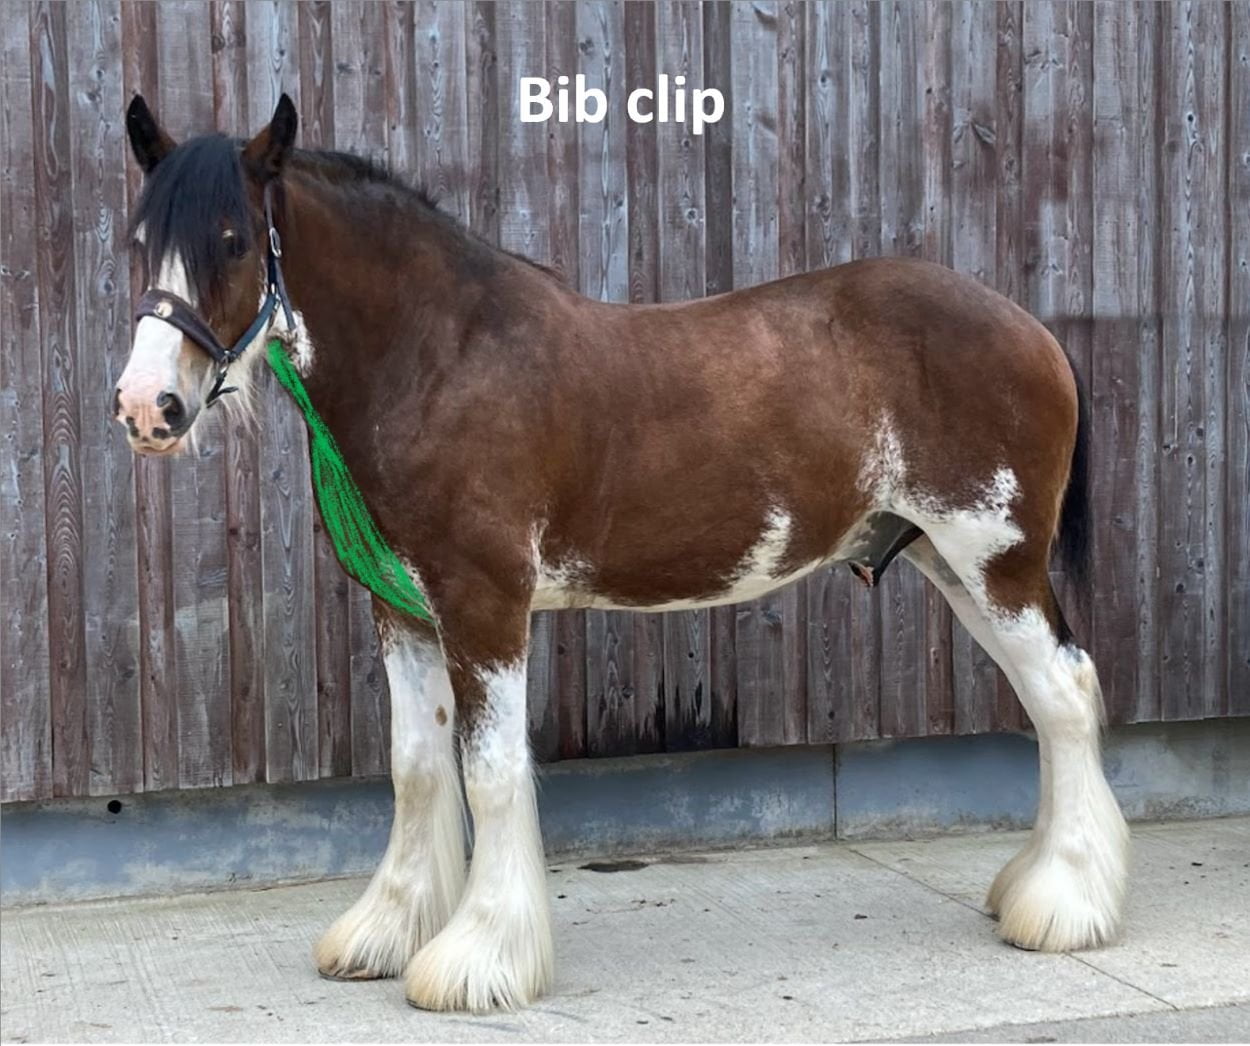 Clydesdale displaying a bib clip